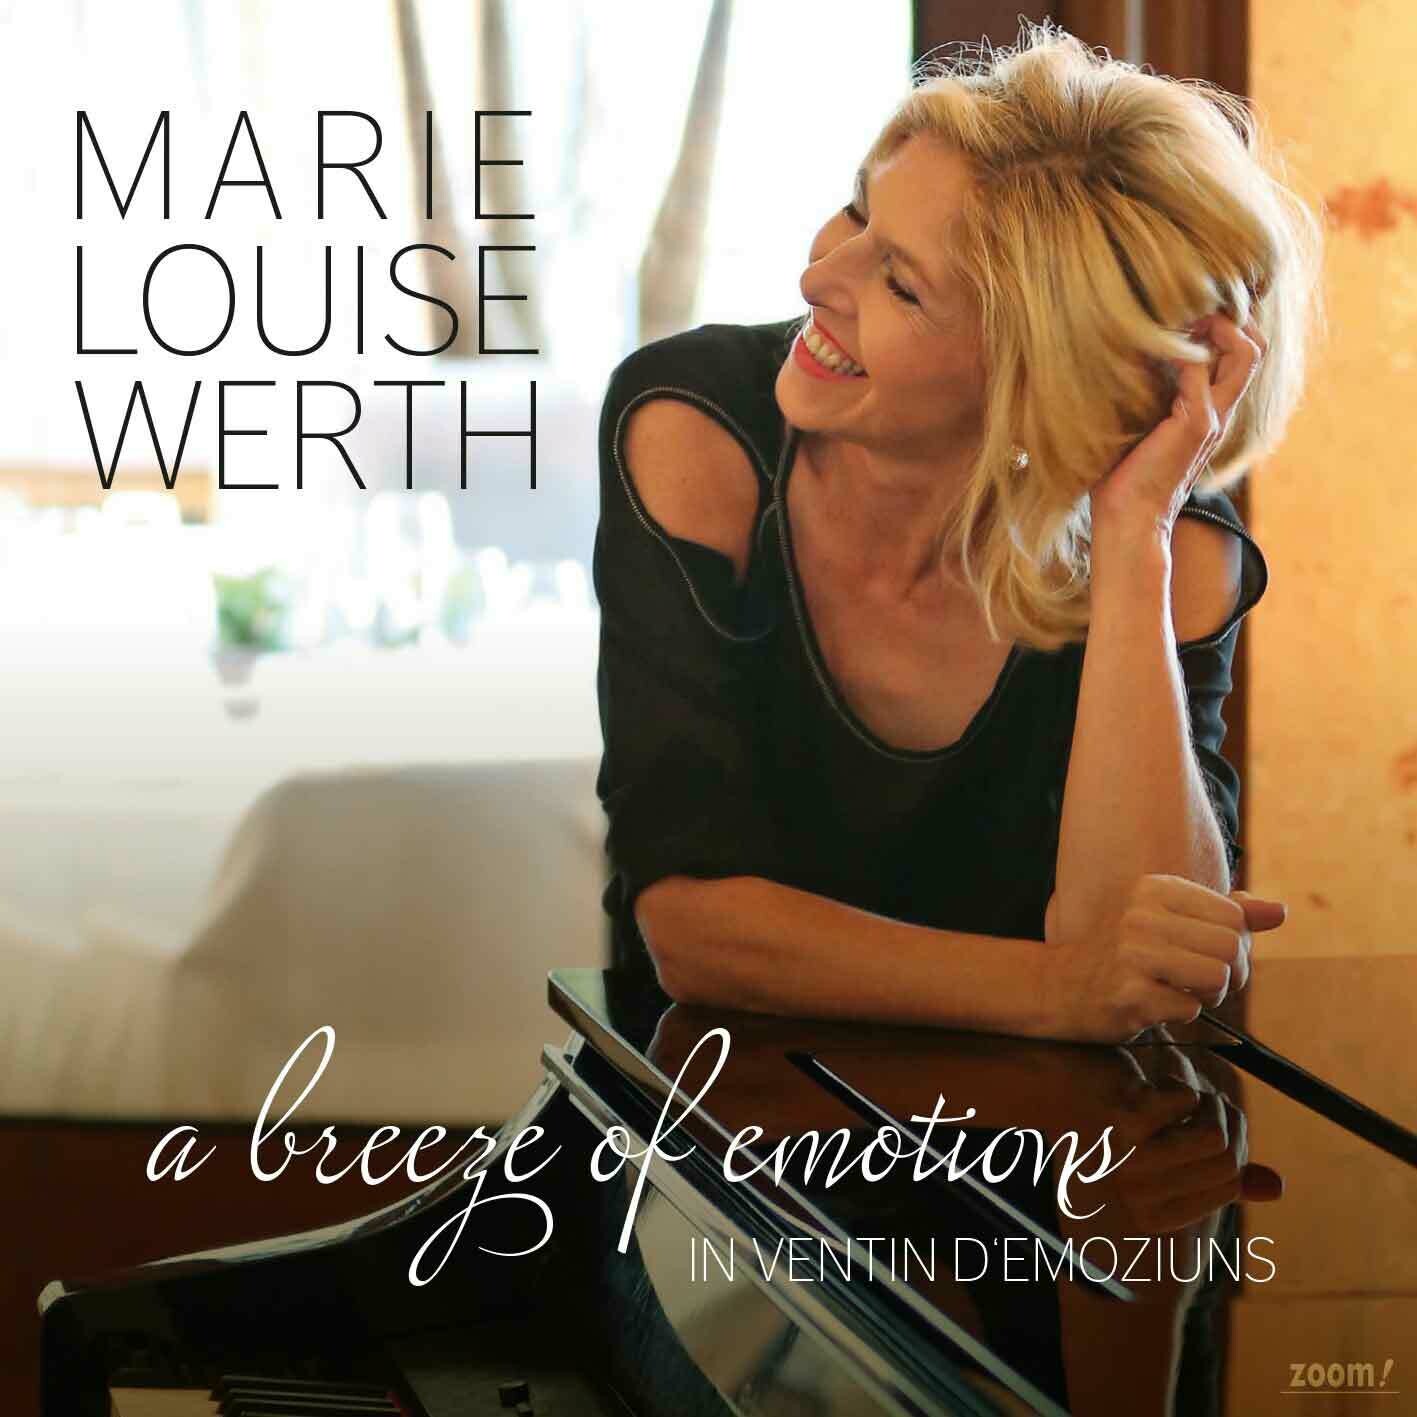 Marie Louise Werth – a breeze of emotions